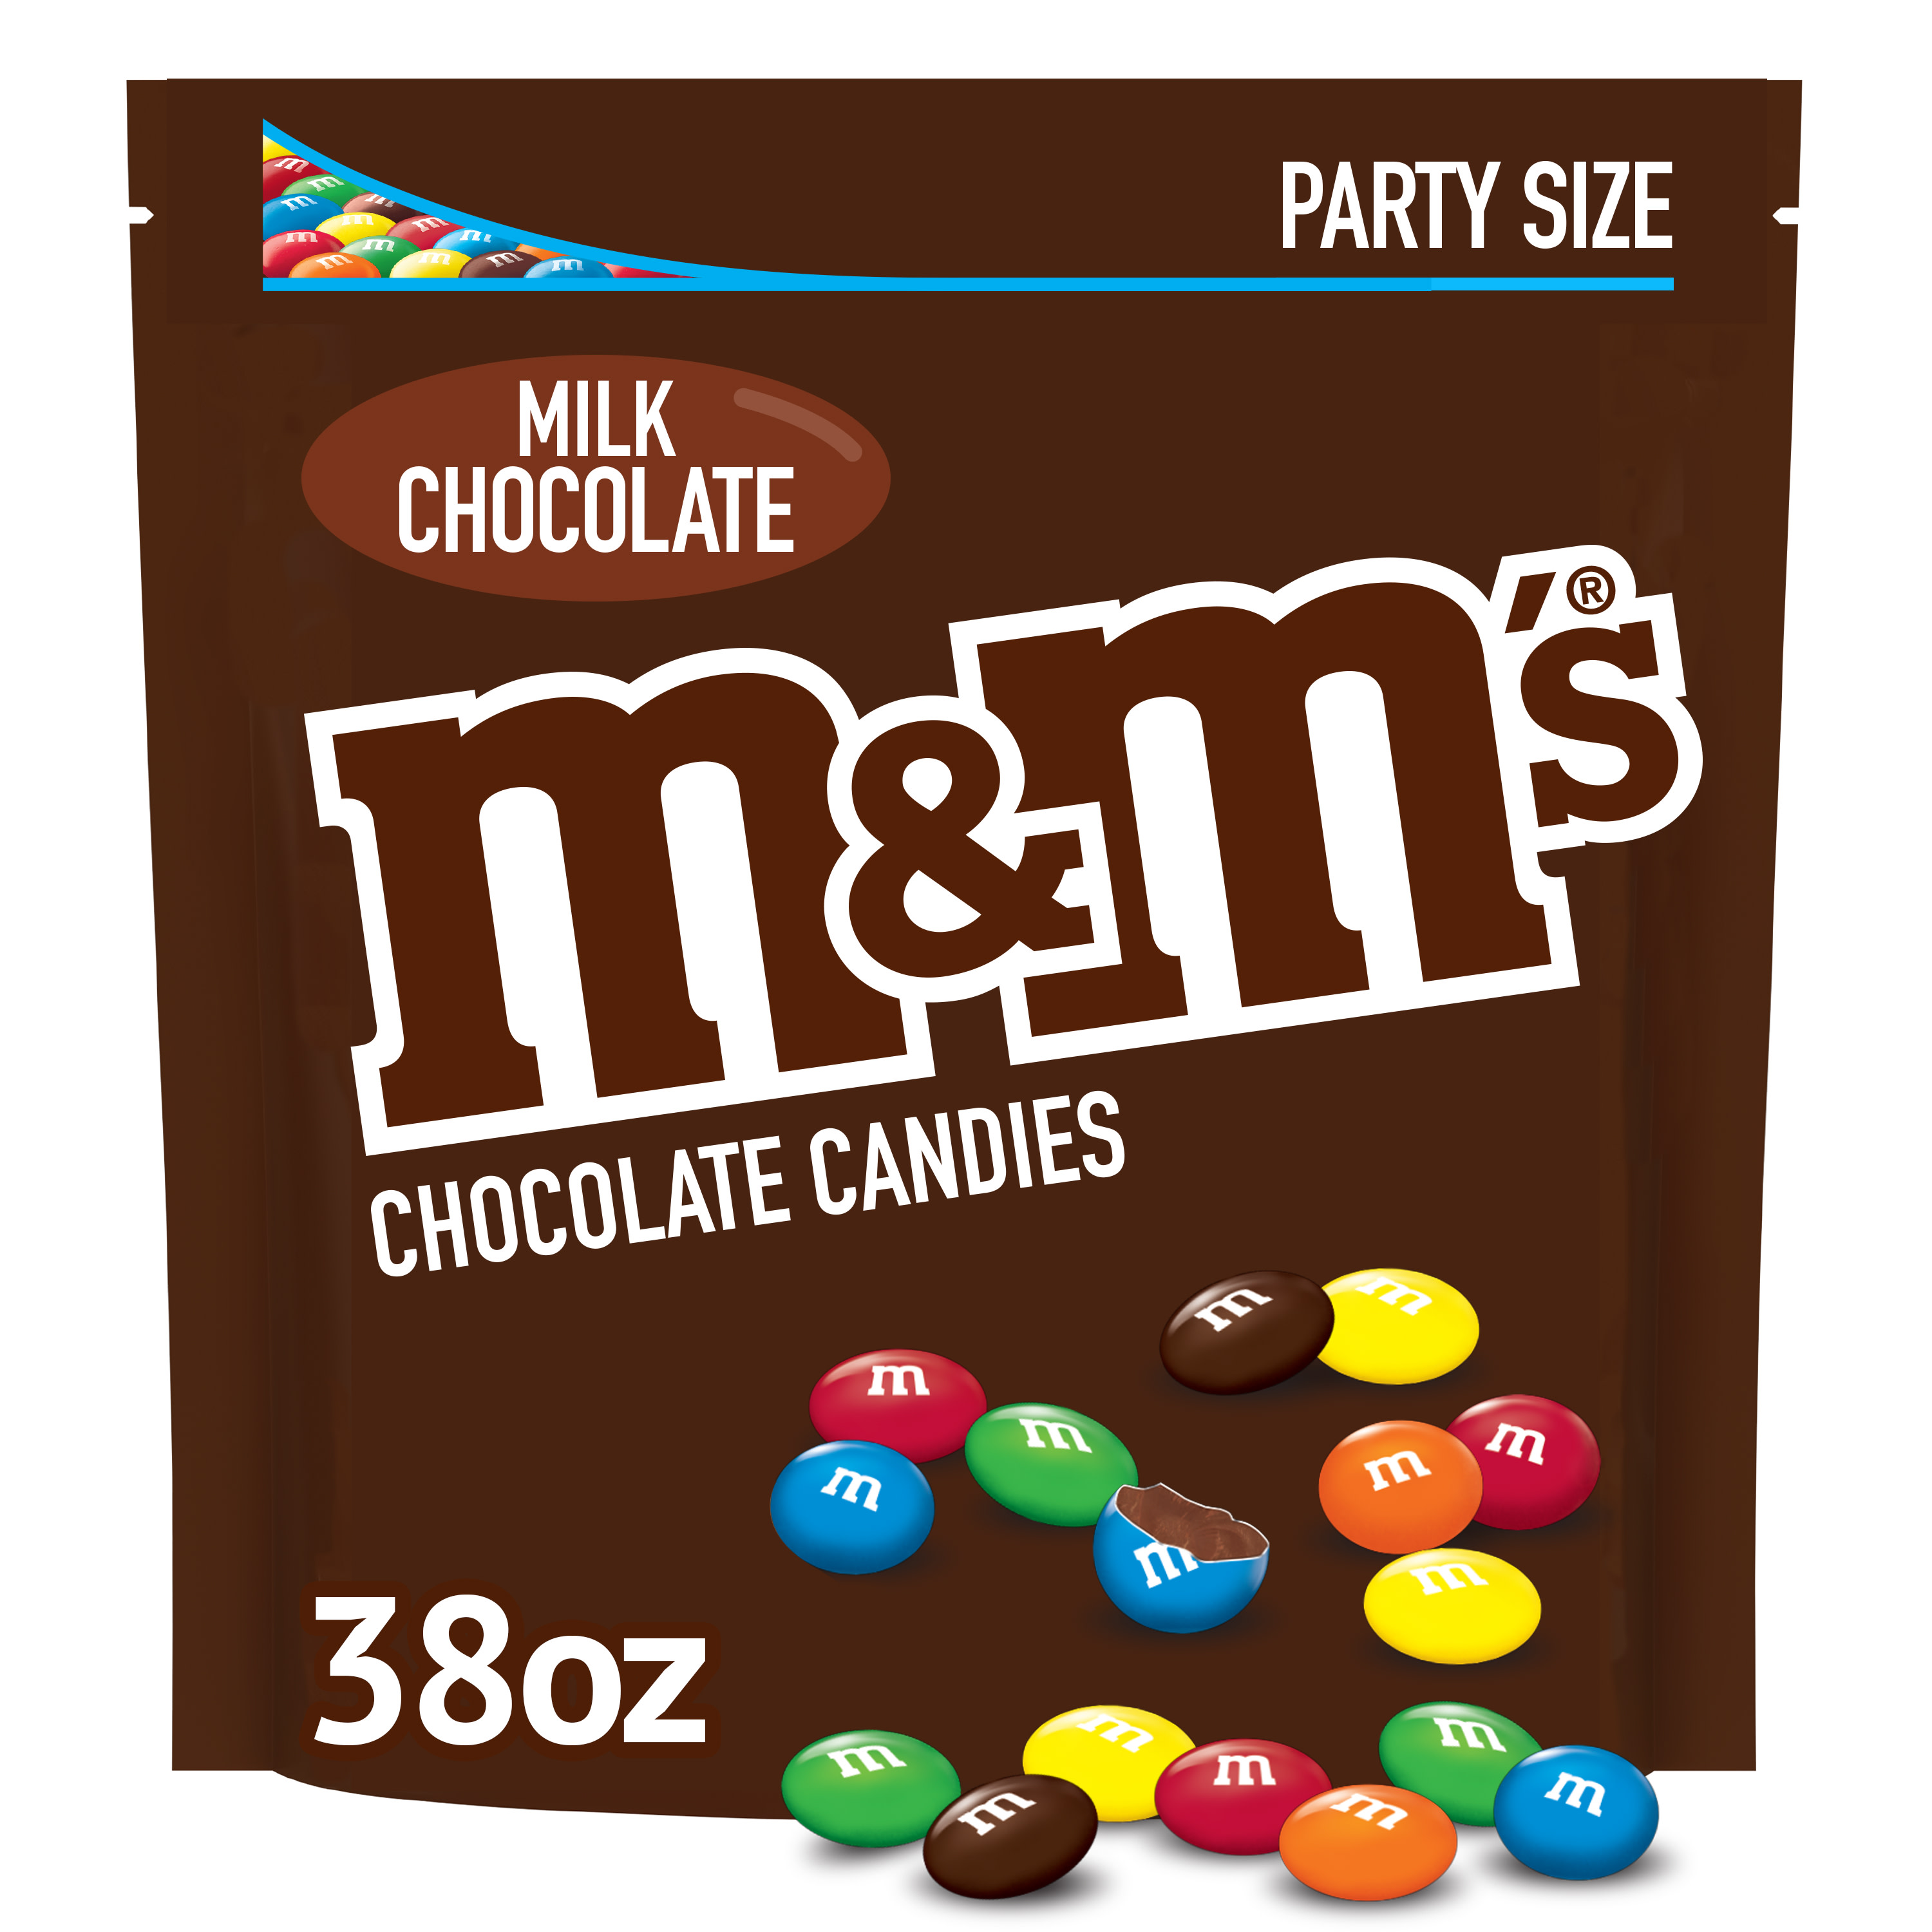 M&M's Milk Chocolate Candy, Party Size - 38 oz Bag - image 1 of 14